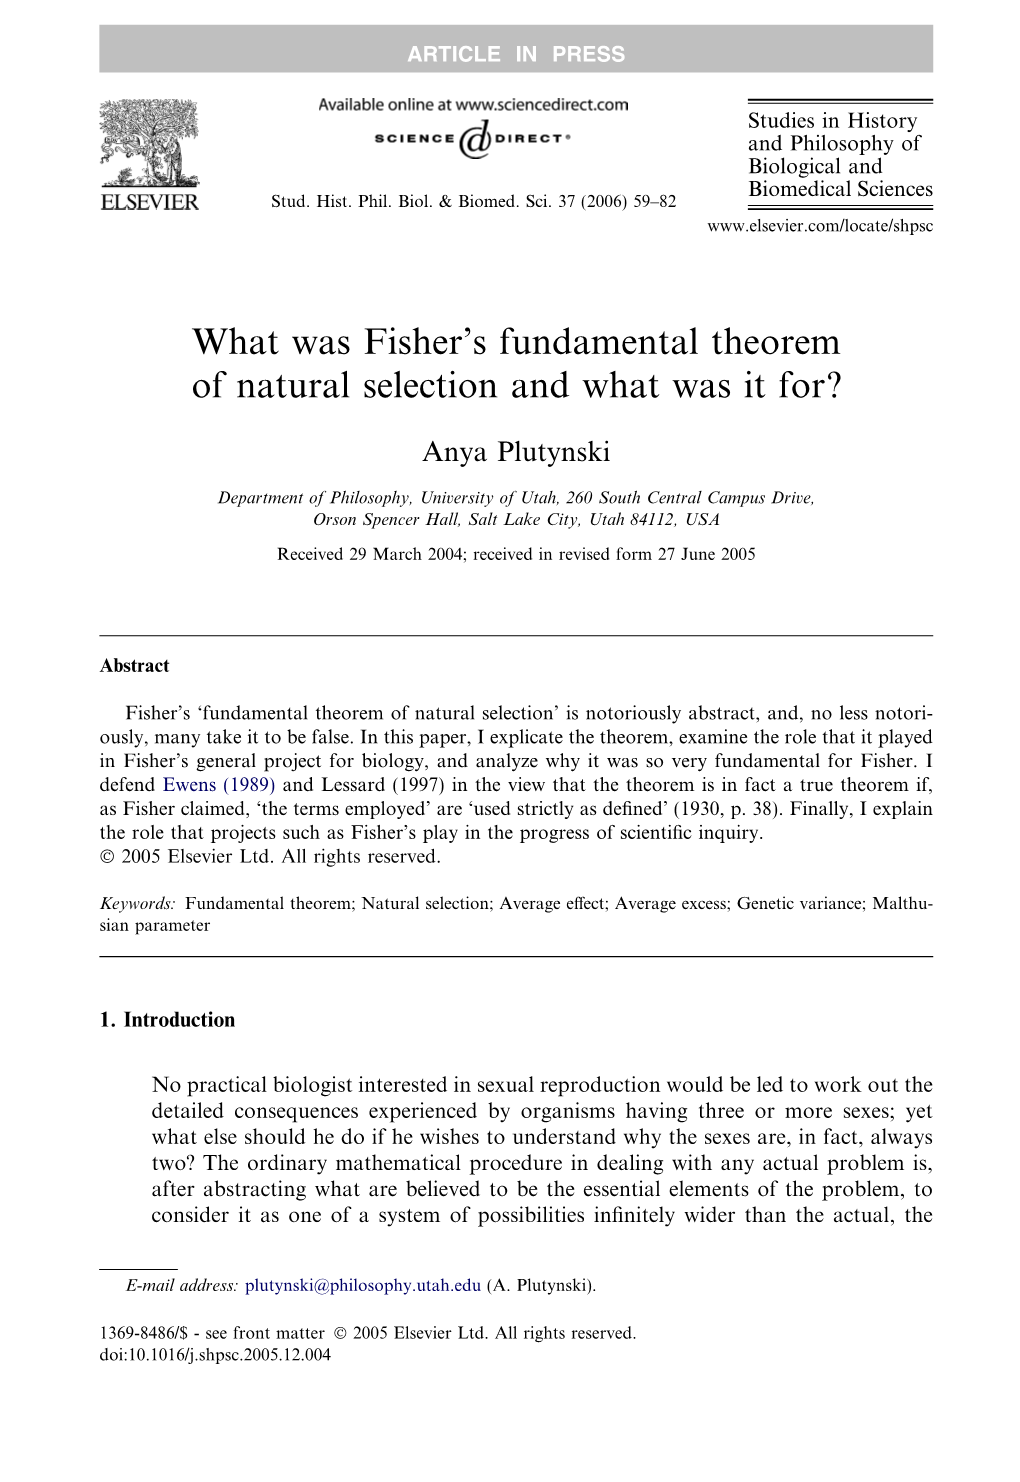 What Was Fisher's Fundamental Theorem of Natural Selection And